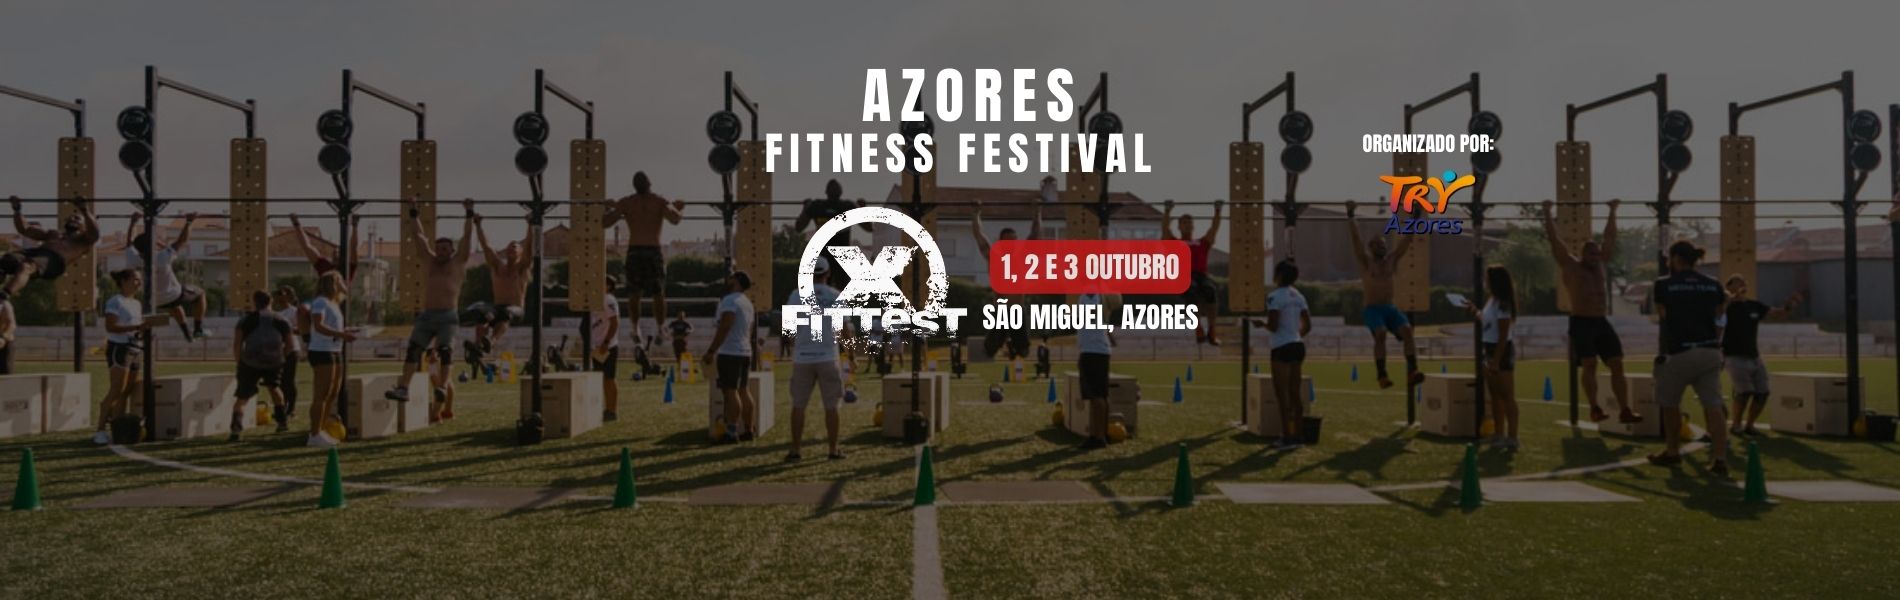 Azores Fitness Festival by Xfittest